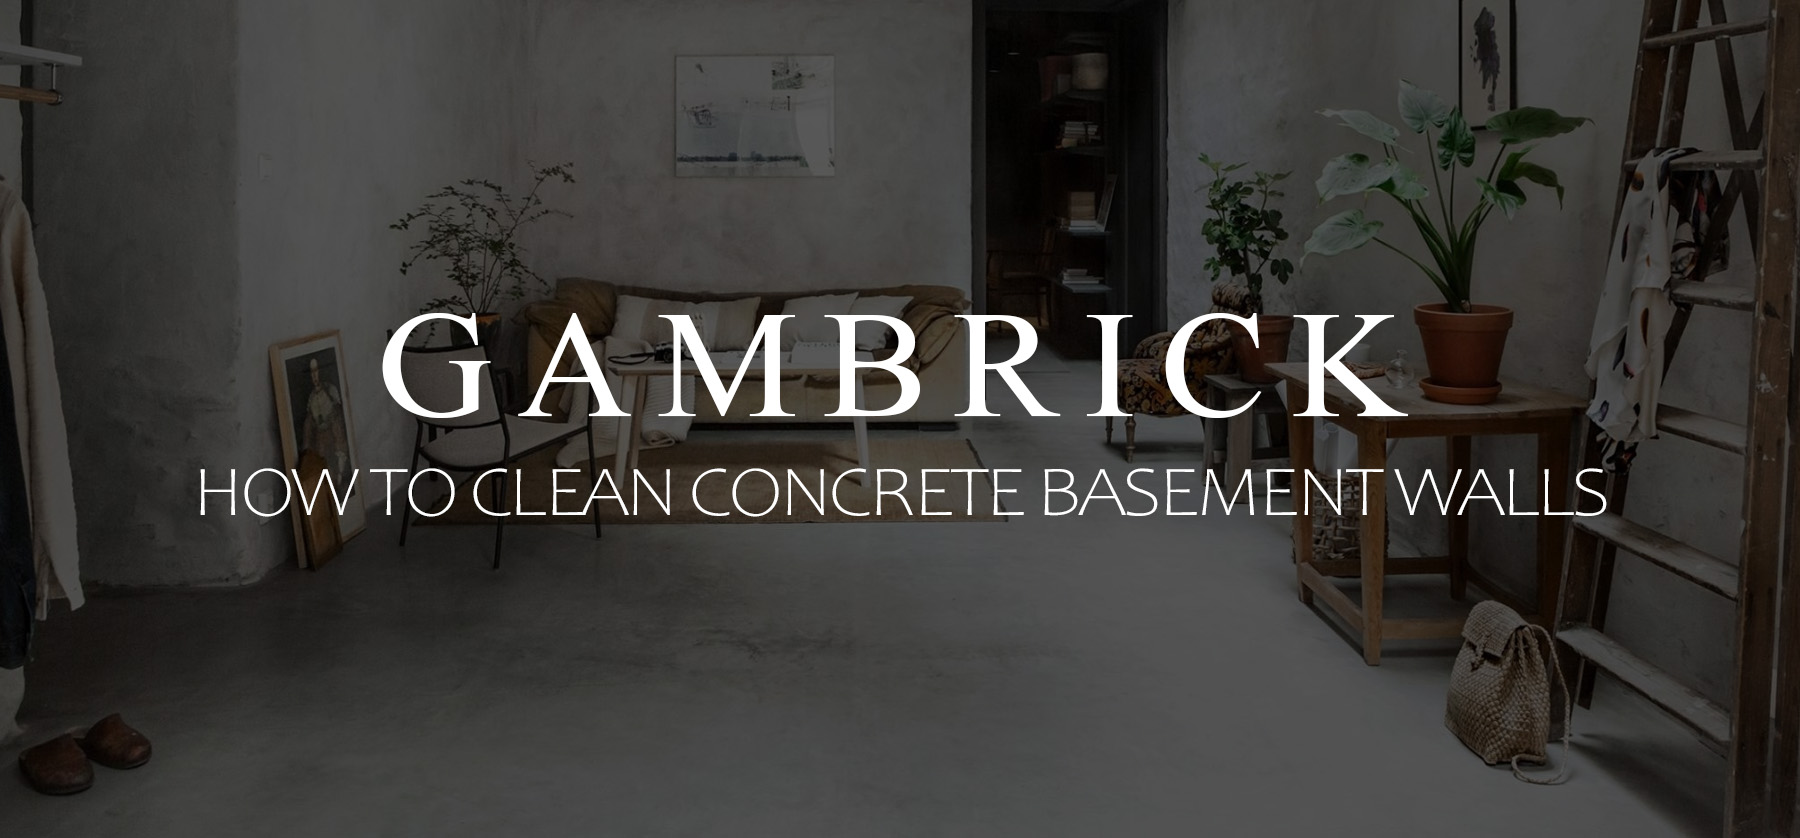 how to clean concrete basement walls banner